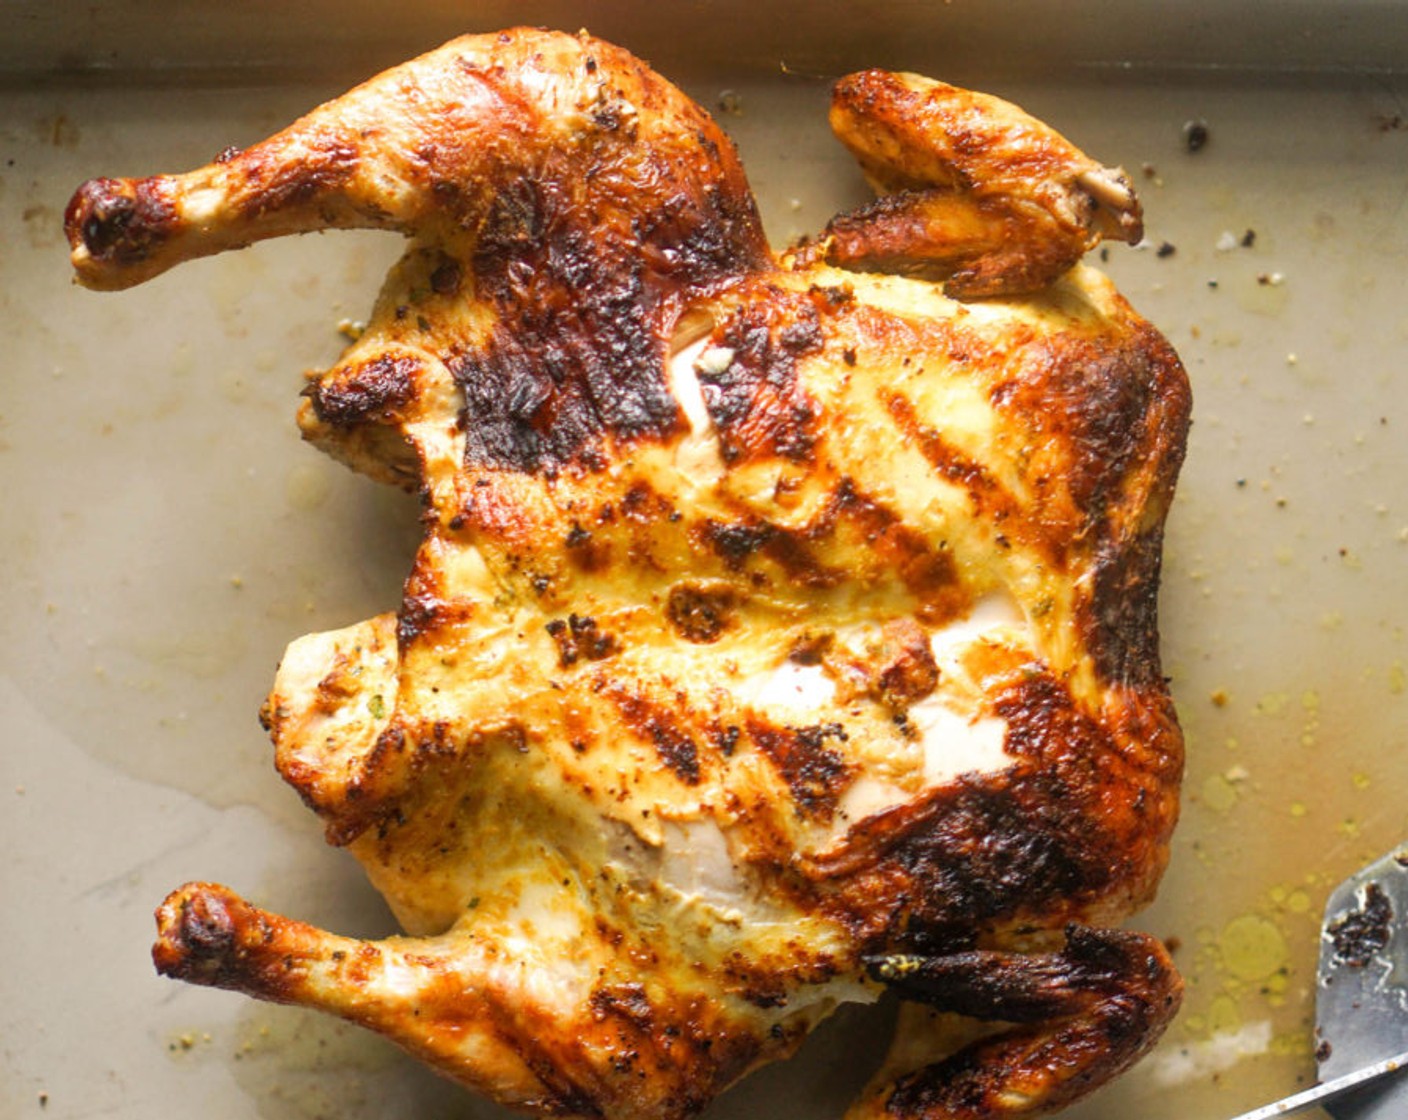 step 10 Take the chicken off of the grill and rest for 10 minutes. Transfer breast side down to the direct side of the grill (over the flame) and allow to char for a few minutes, or until temperature reaches 165 degrees F (74 degrees C).